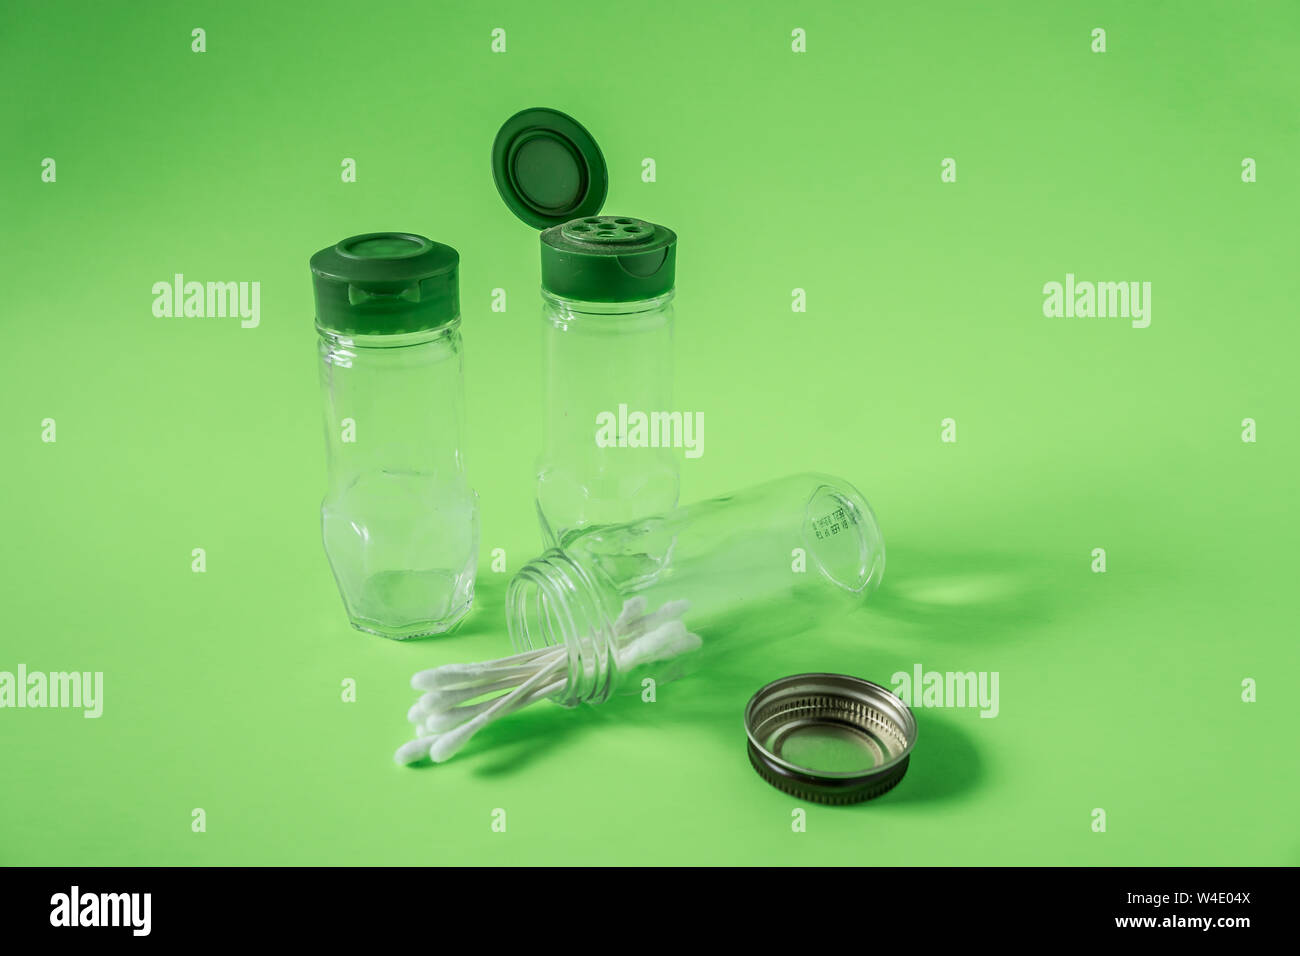 https://c8.alamy.com/comp/W4E04X/3-glass-spice-jars-on-lime-green-background-with-blank-empty-room-space-for-text-or-copy-three-kitchen-bottles-recycled-and-reused-to-store-cotton-sw-W4E04X.jpg